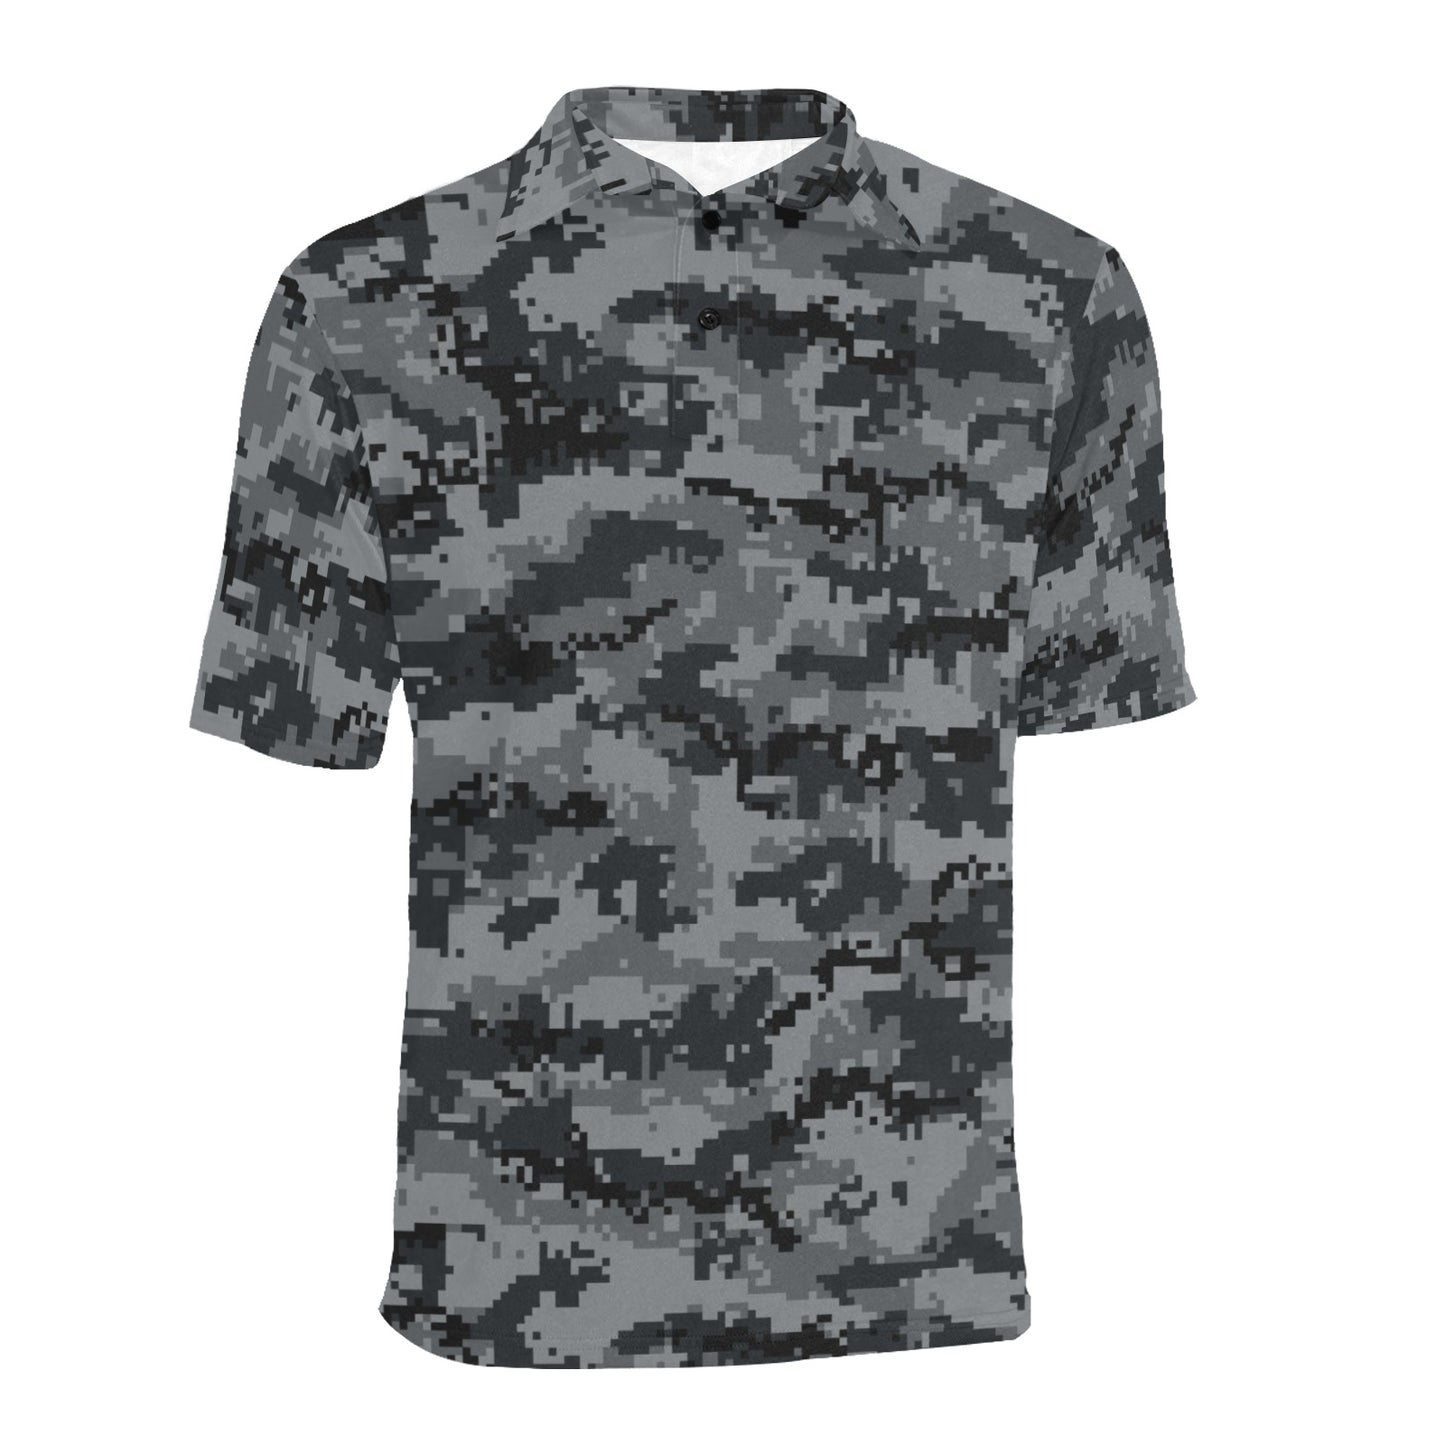 Camouflage Men Polo Collared Shirt, Digital Camo Grey Black Pattern Casual Summer Buttoned Down Up Shirt Short Sleeve Sports Golf Tee